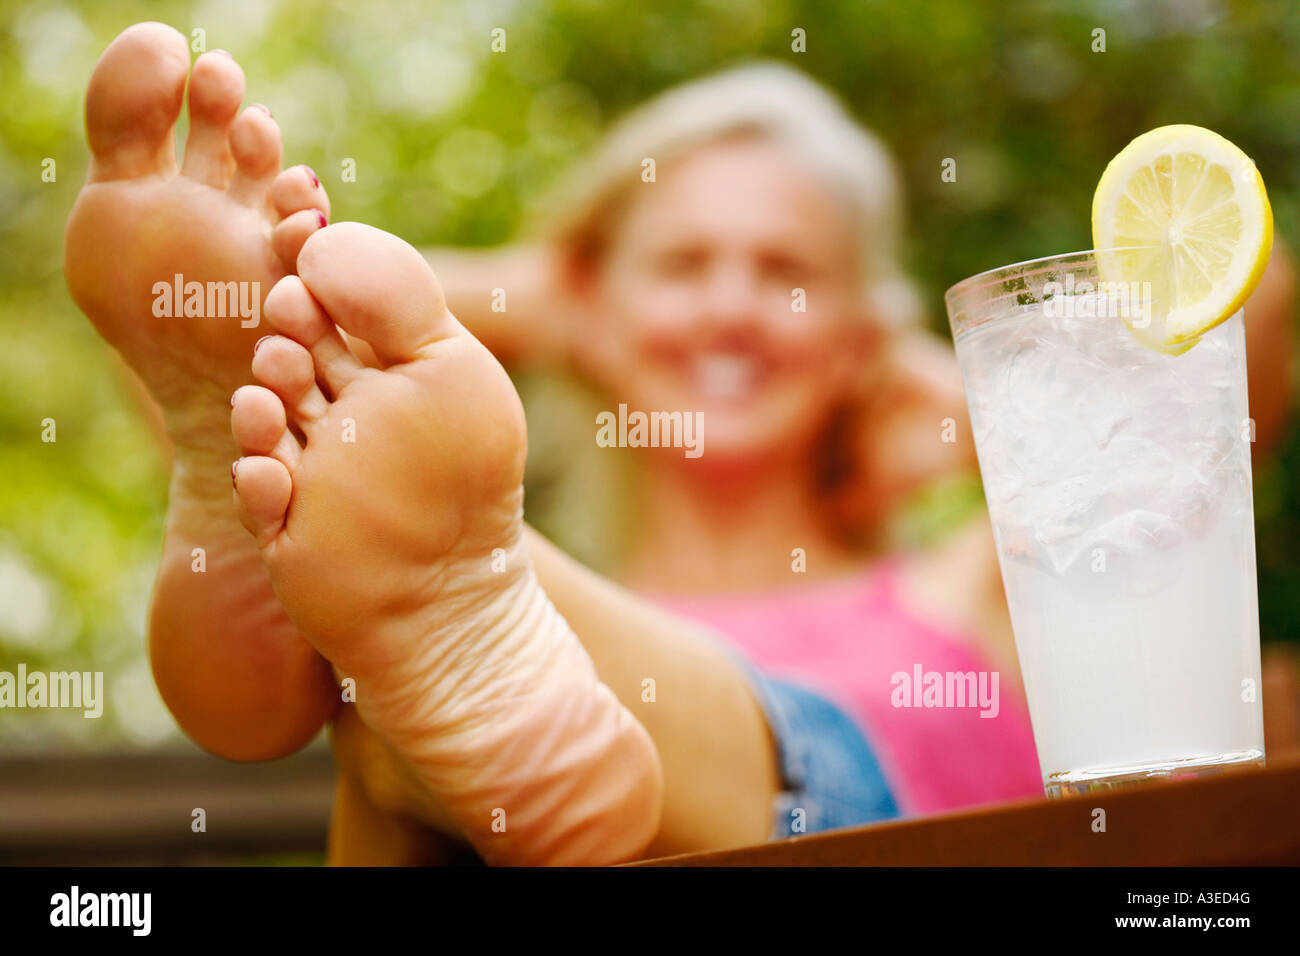 Mature female feet Close Up Of A Mature Woman S Foot With A Glass Of Lemon Juice Beside Her Stock Photo Alamy